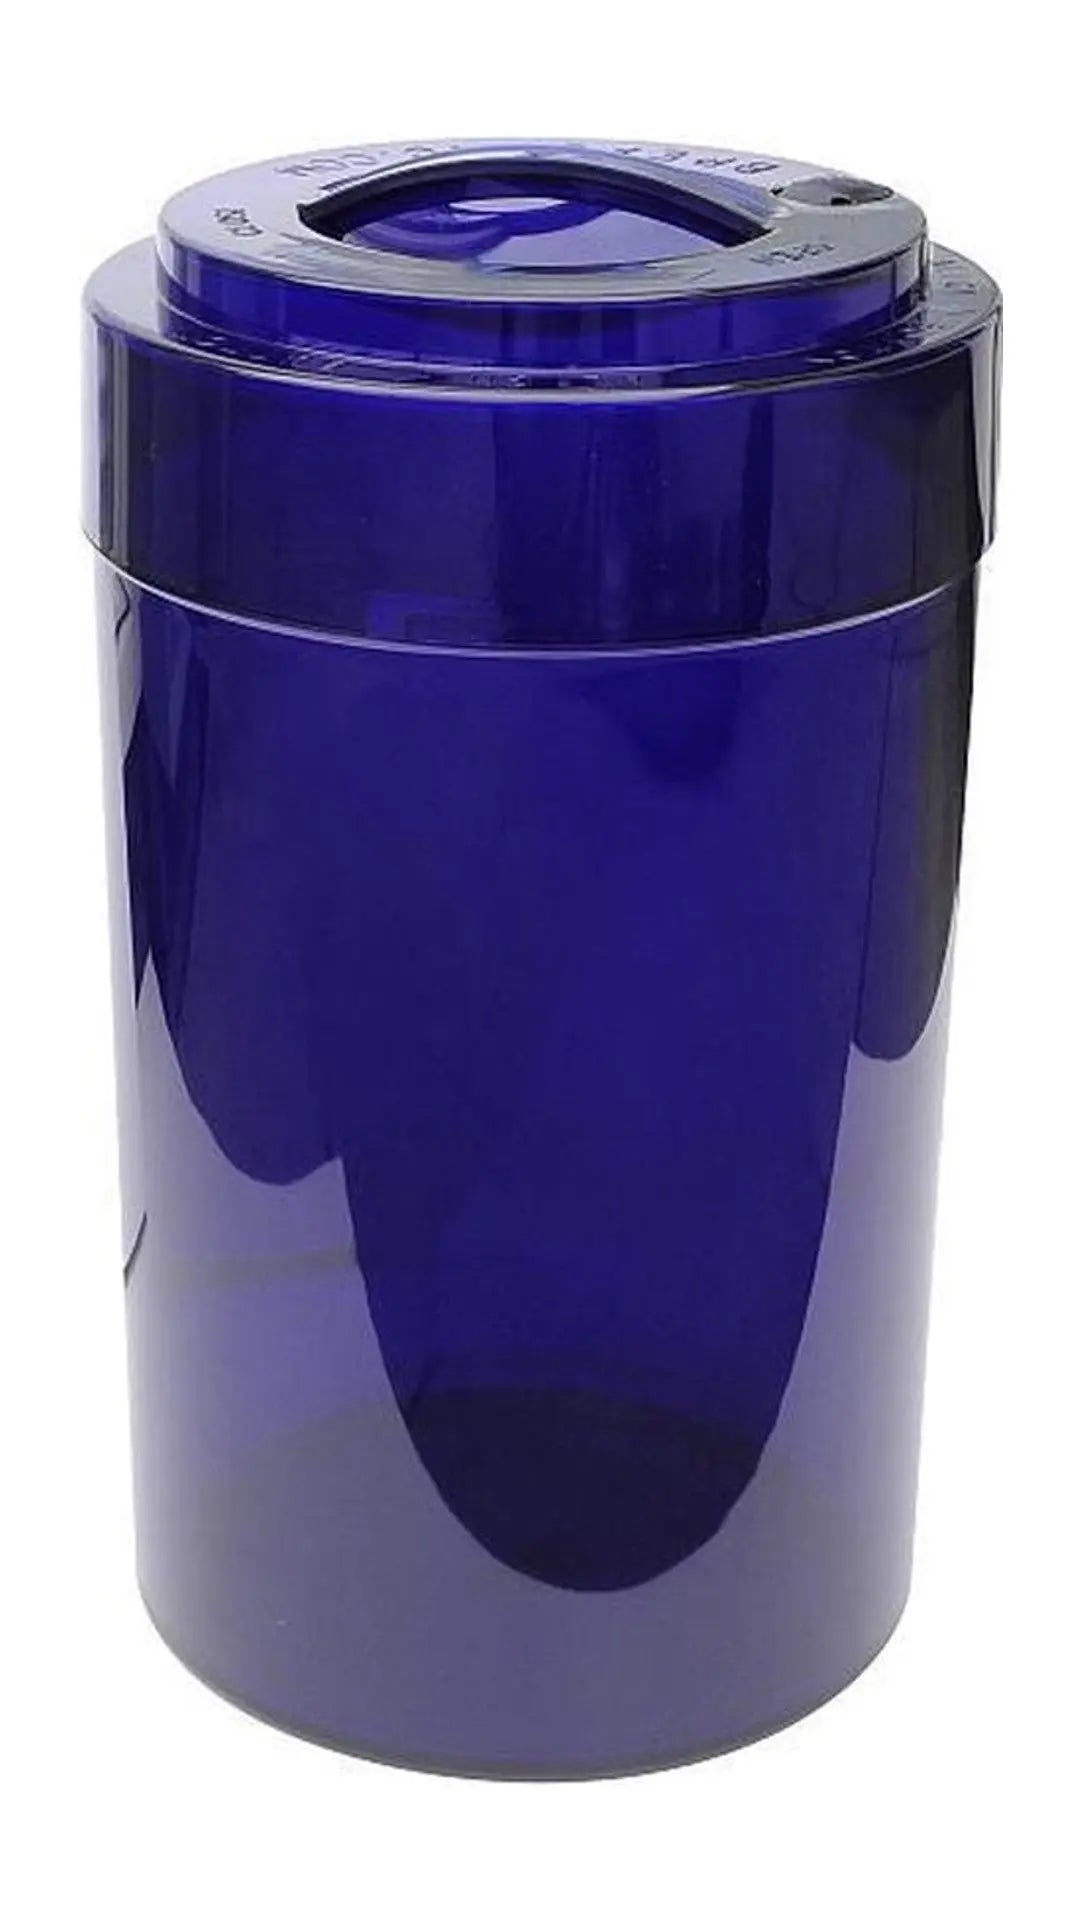 Breadvac 10 liter / 2500g / Clear / Blue Tint - TightVac Europe - The eassiest storage solutions